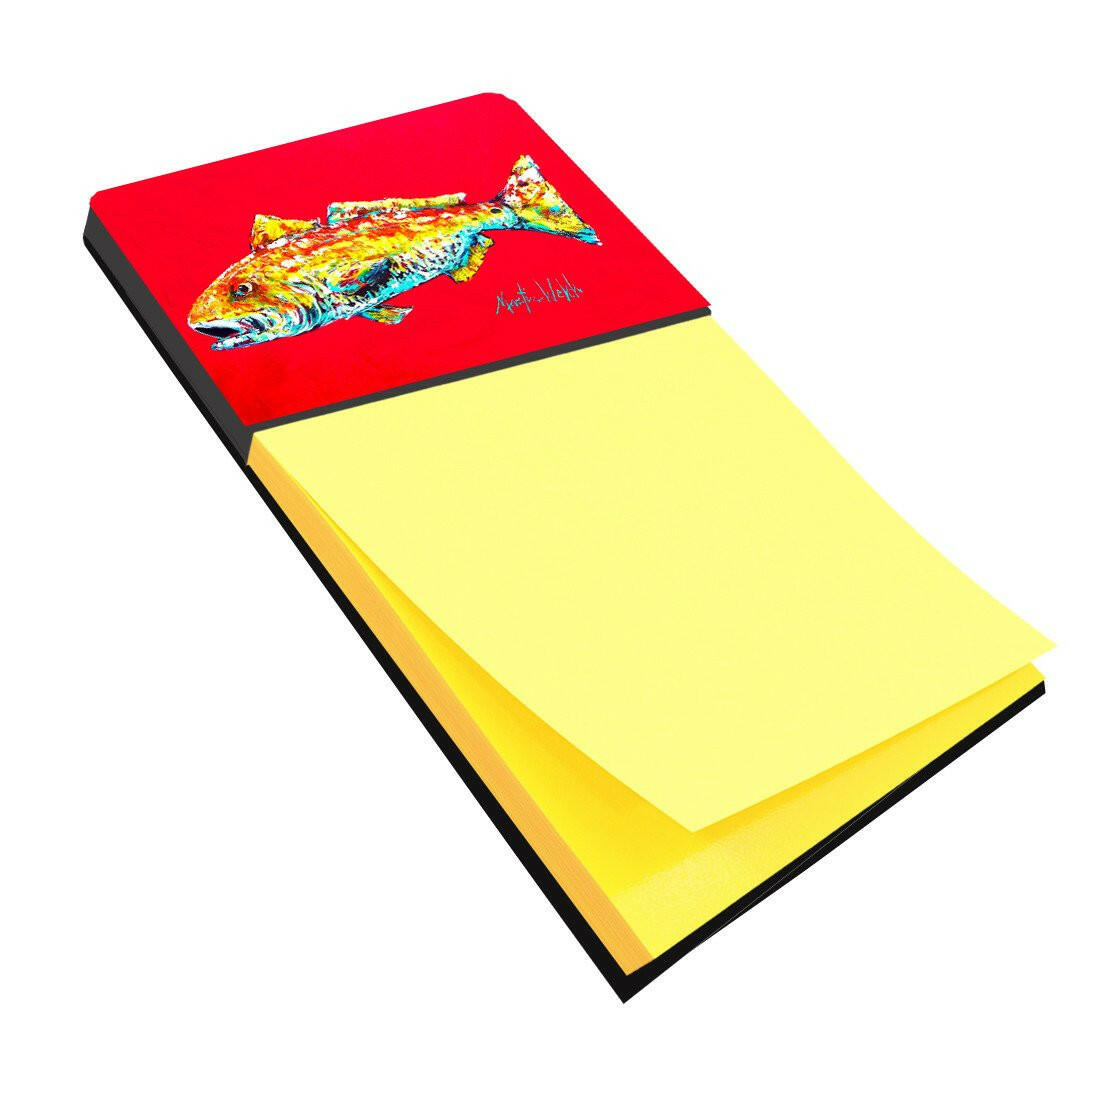 Fish - Red Fish Alphonzo Refiillable Sticky Note Holder or Postit Note Dispenser MW1084SN by Caroline's Treasures